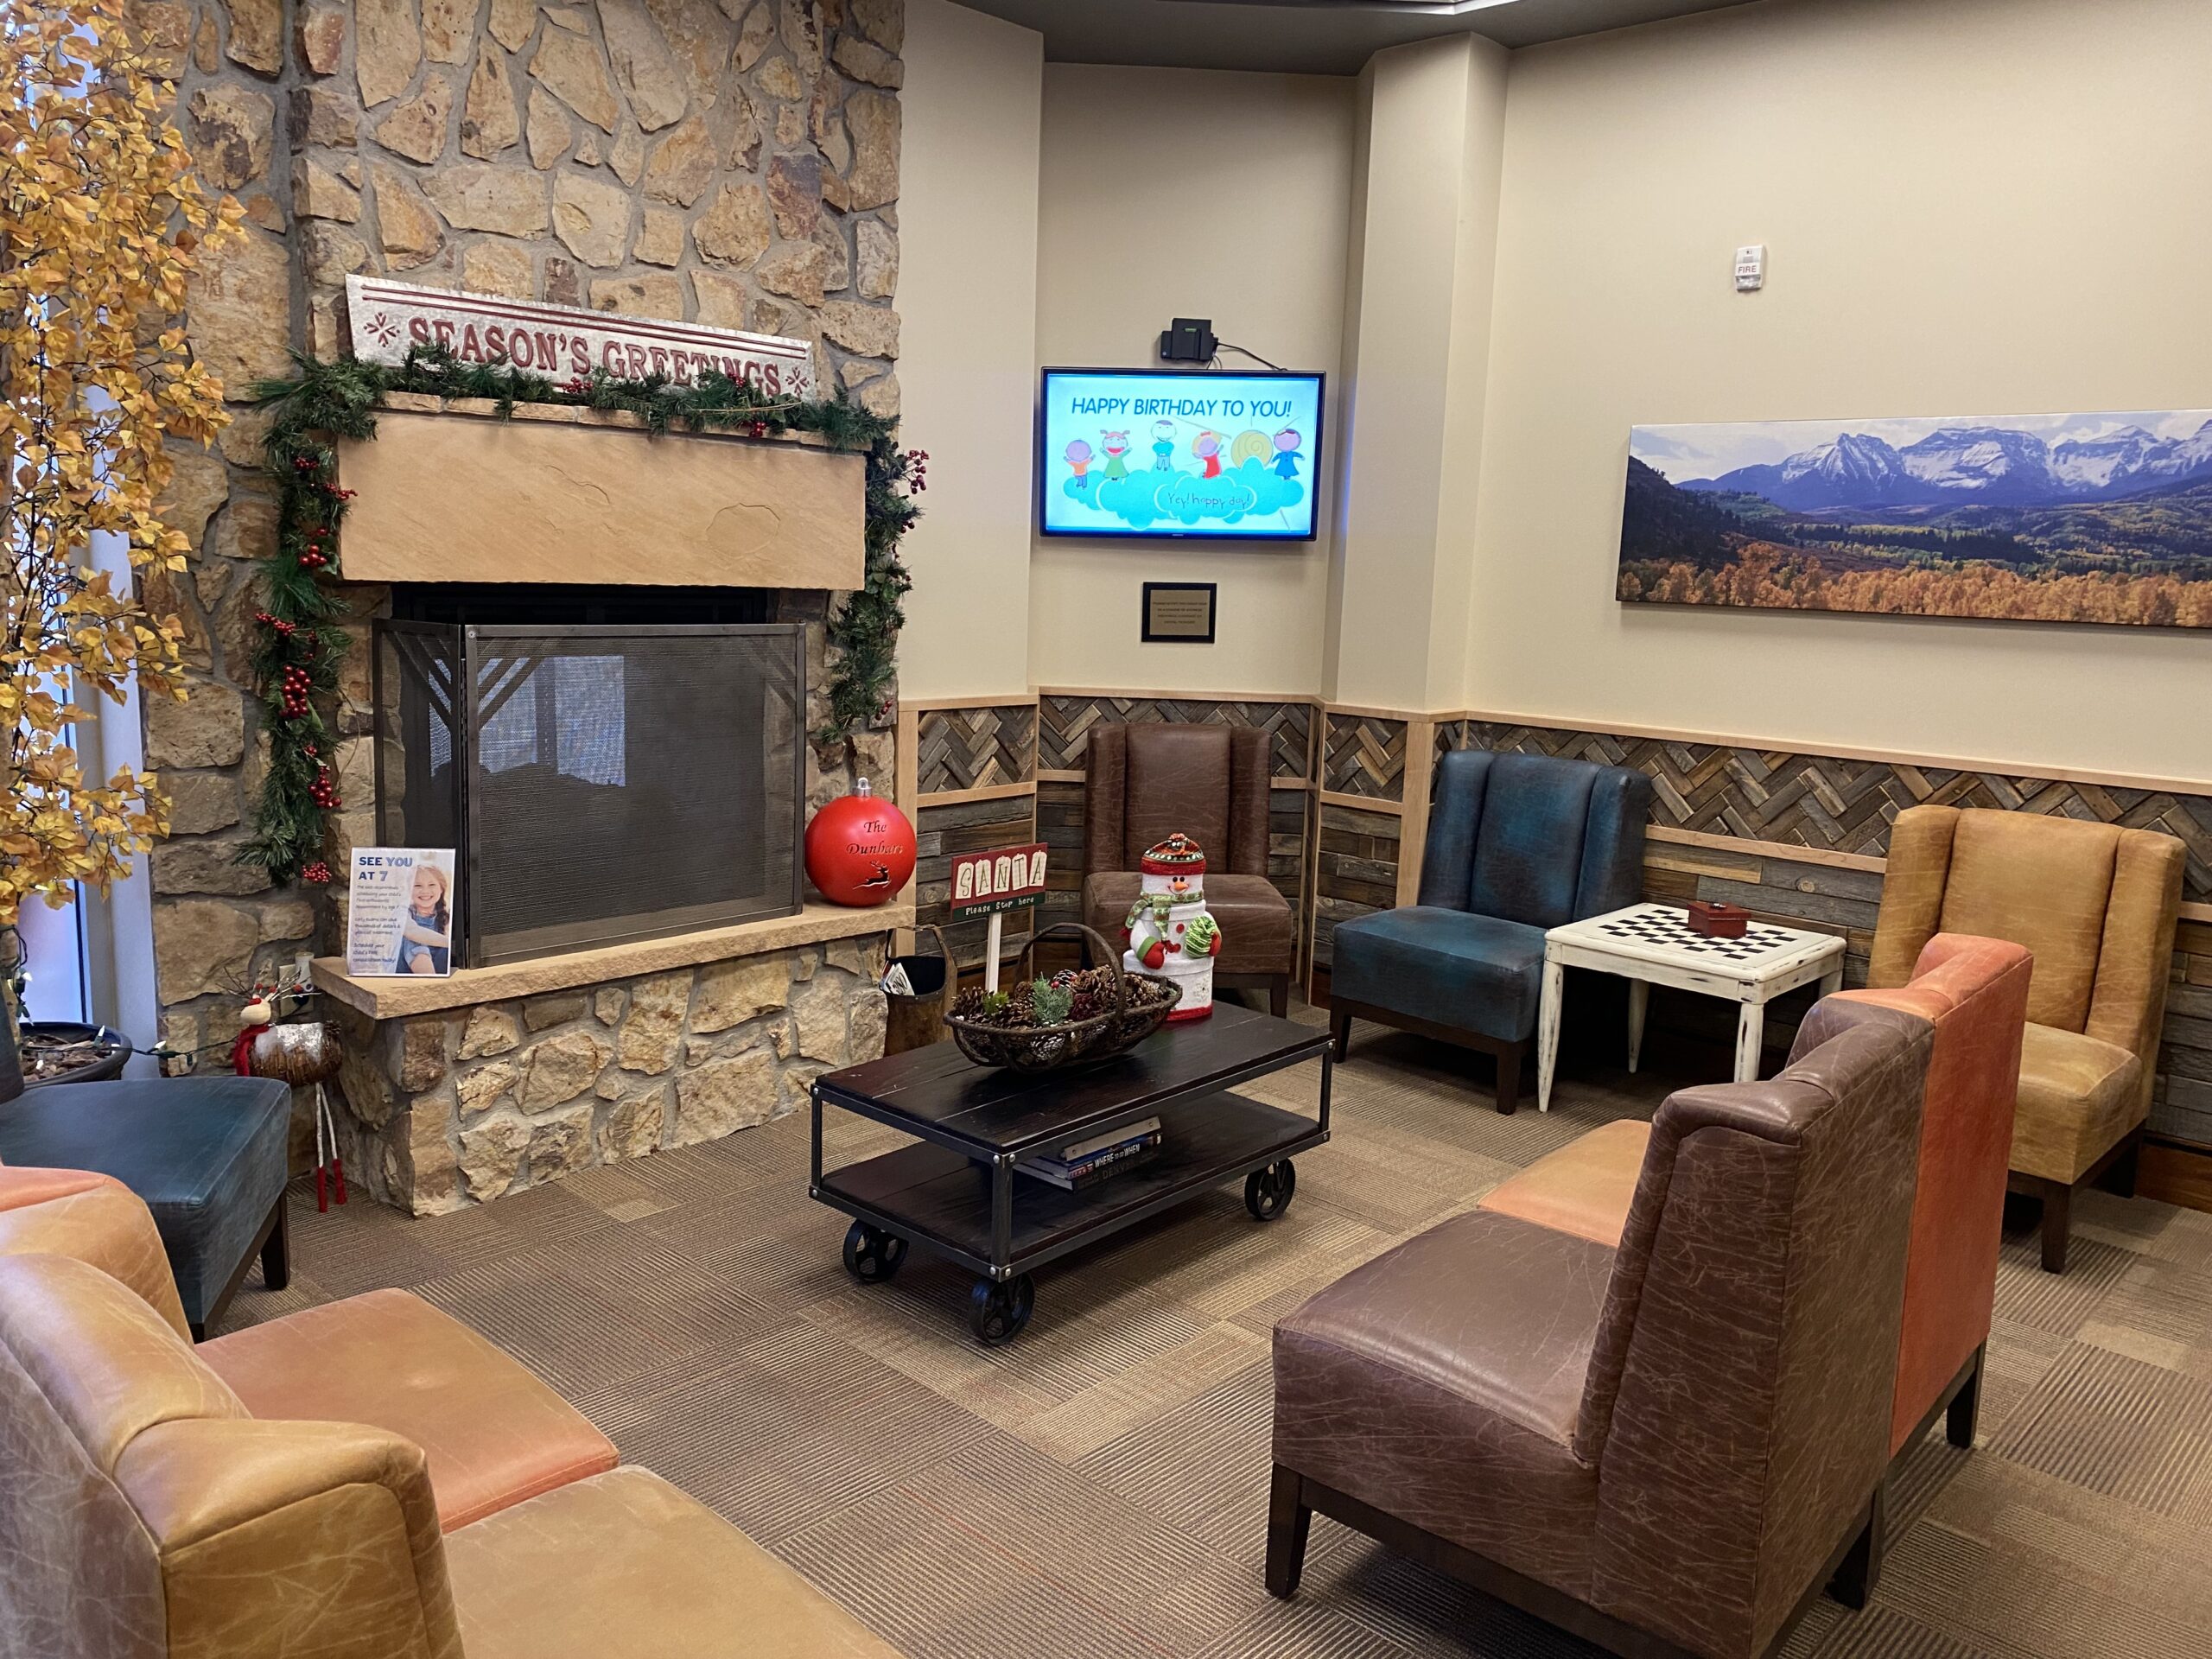 Inside the office of Castle Pines Orthodontics in Castle Pines, CO